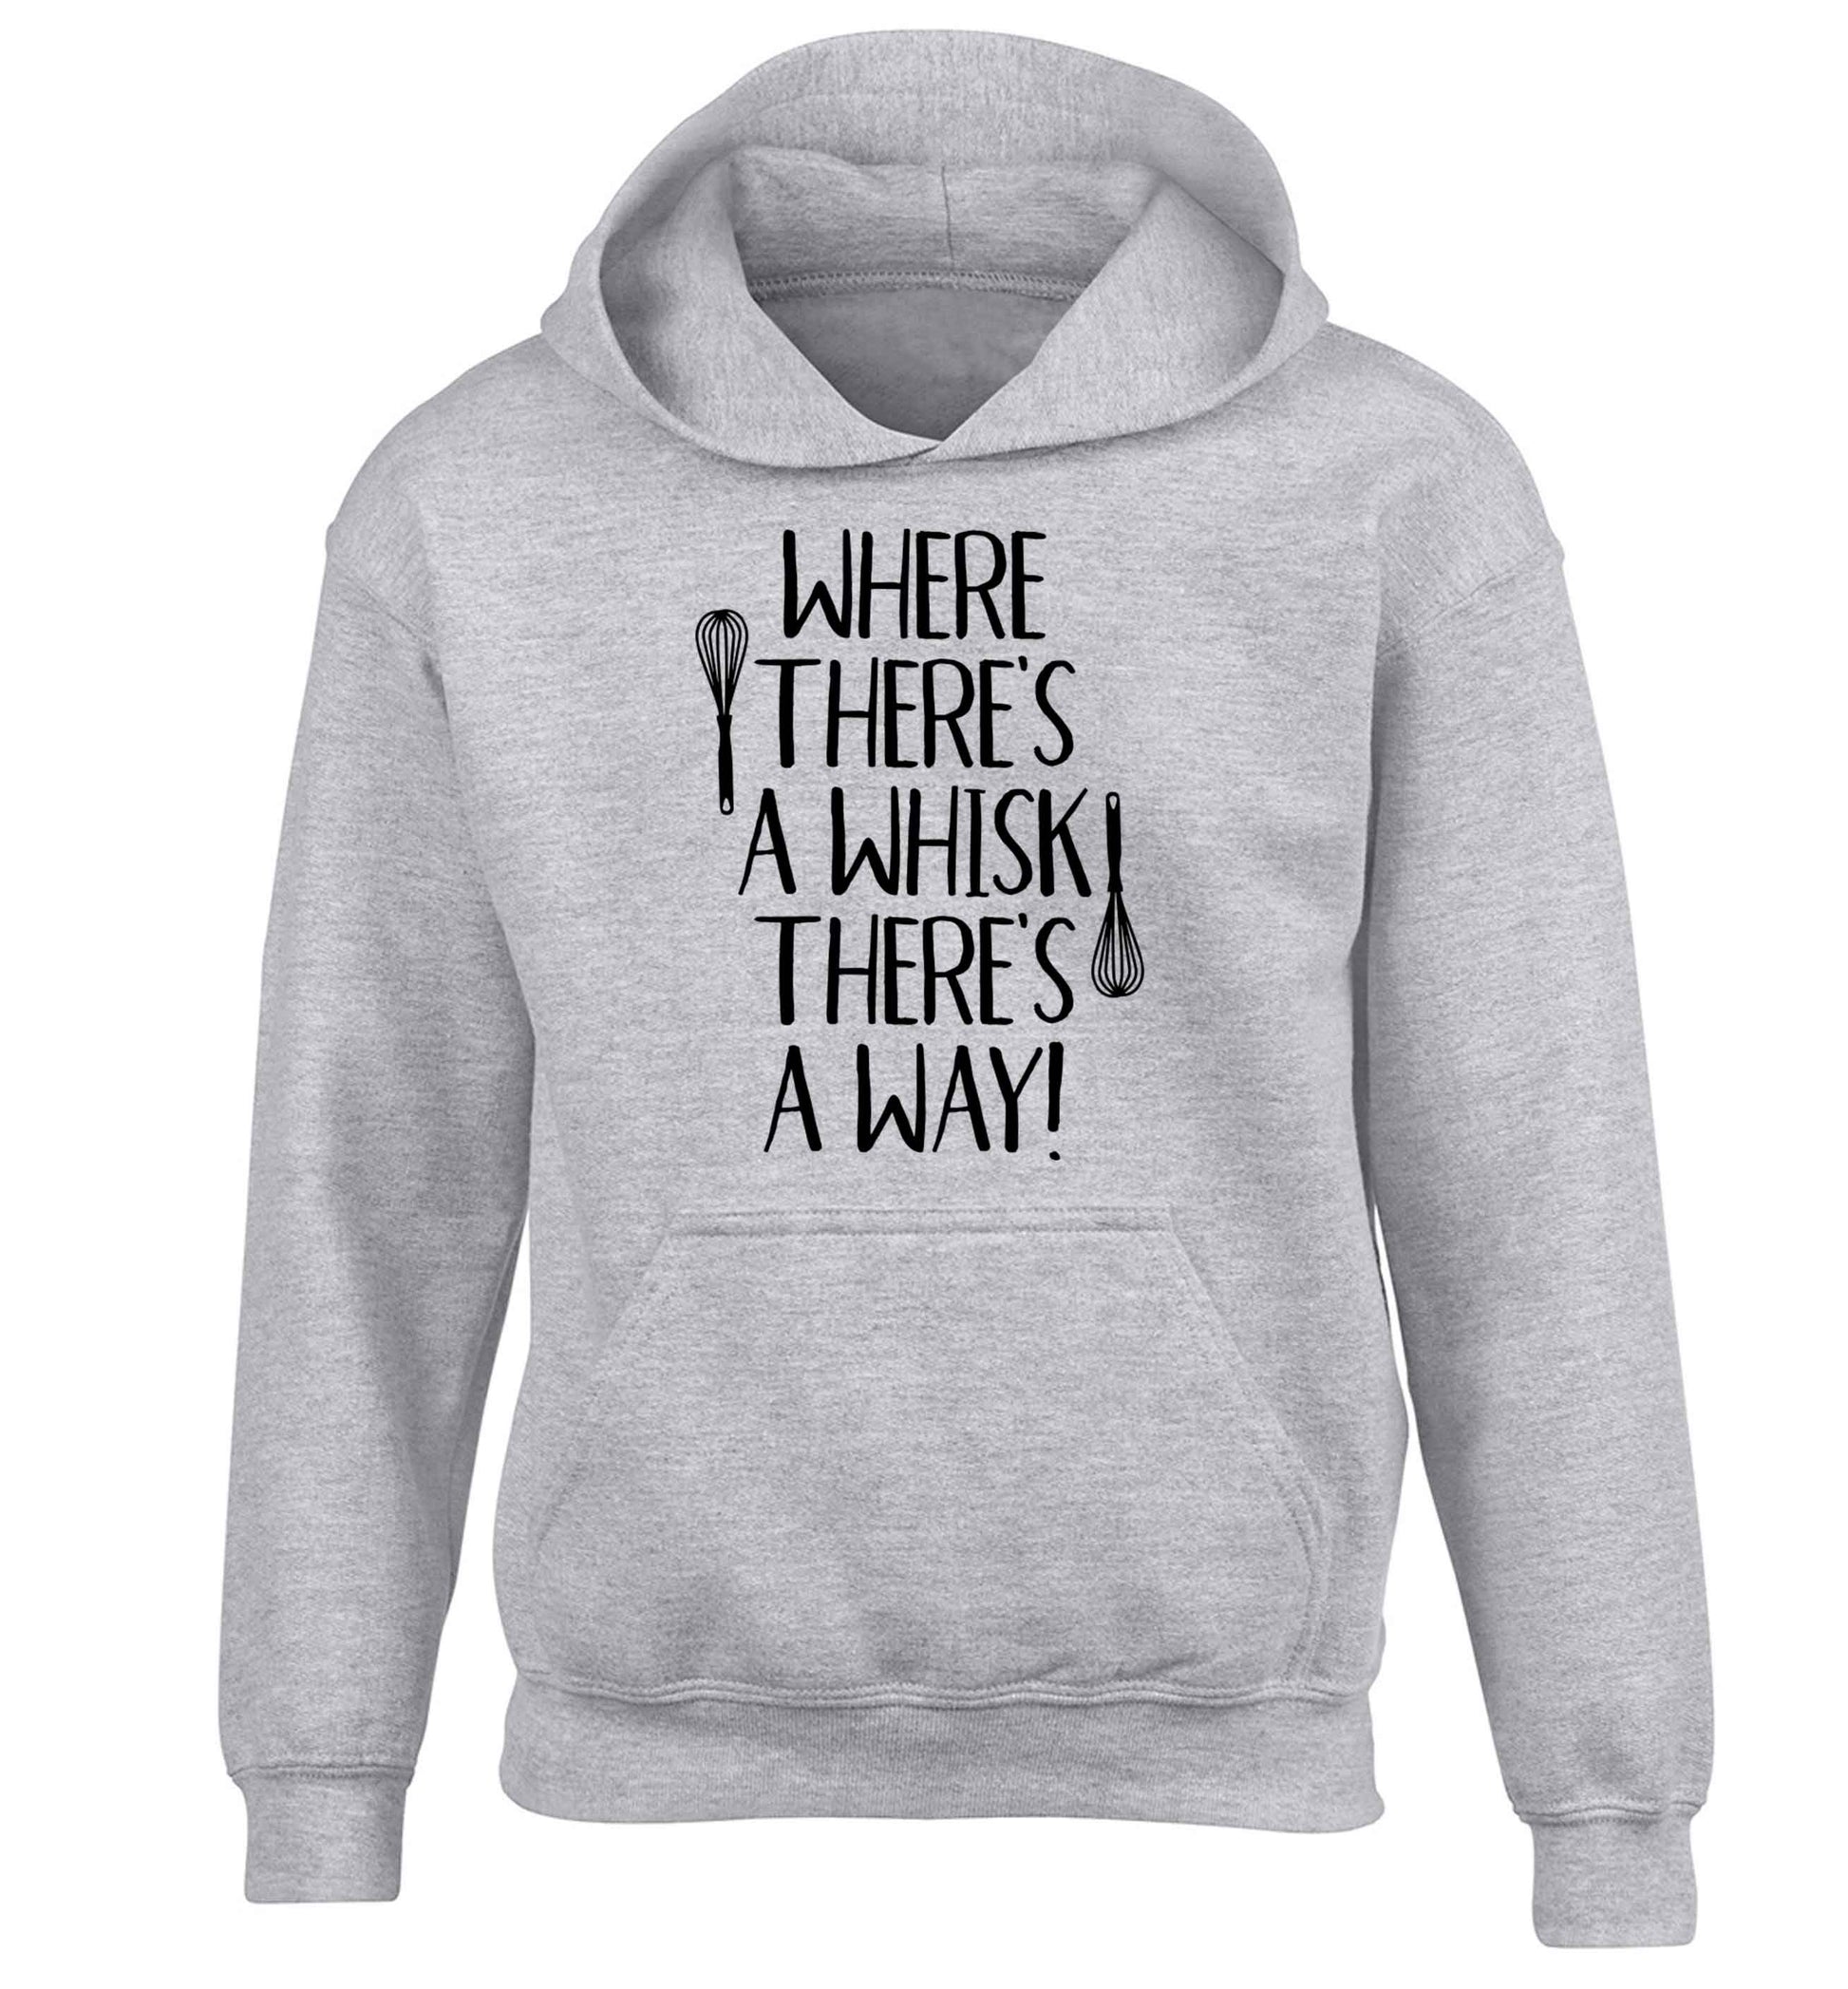 Where there's a whisk there's a way children's grey hoodie 12-13 Years